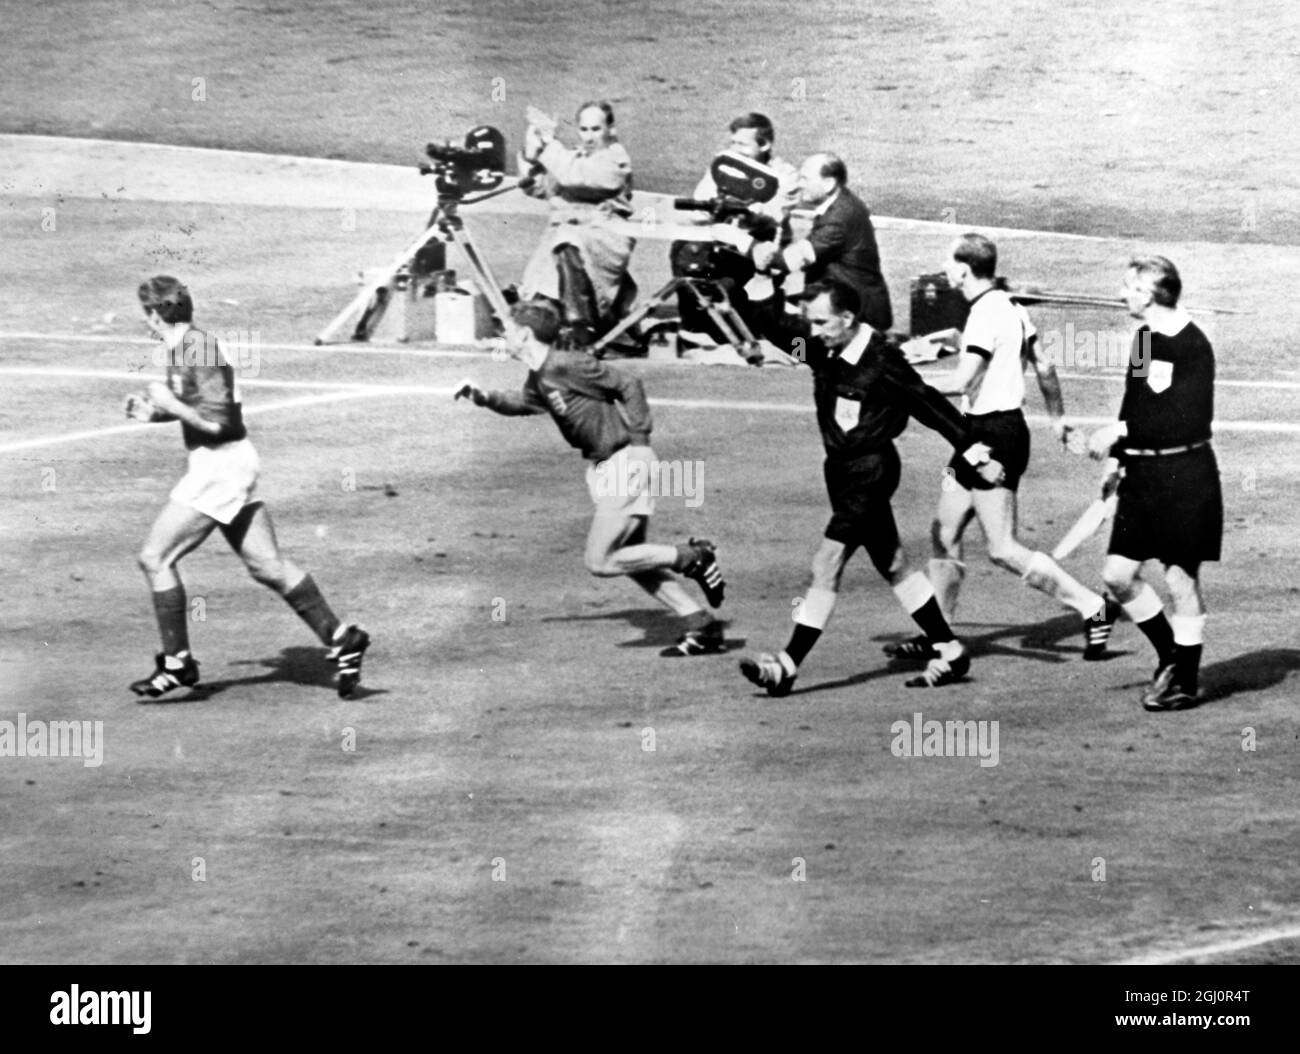 Controvesial Third Goal. Swiss referee Gottfried Dienst points to the middle of the field indicating that he is allowing the controvesial third goal for England scored by Geoff Hurst during yesterday's World Cup Final against West Germany. Two England players are seen racing off to join jubilant team mates. The ball hit the crossbar and rebounded down. All the England players claimed the ball has crossed the line. After consulting the Russian Linesman, the referee allowed the goal. 30 July 1966 Stock Photo